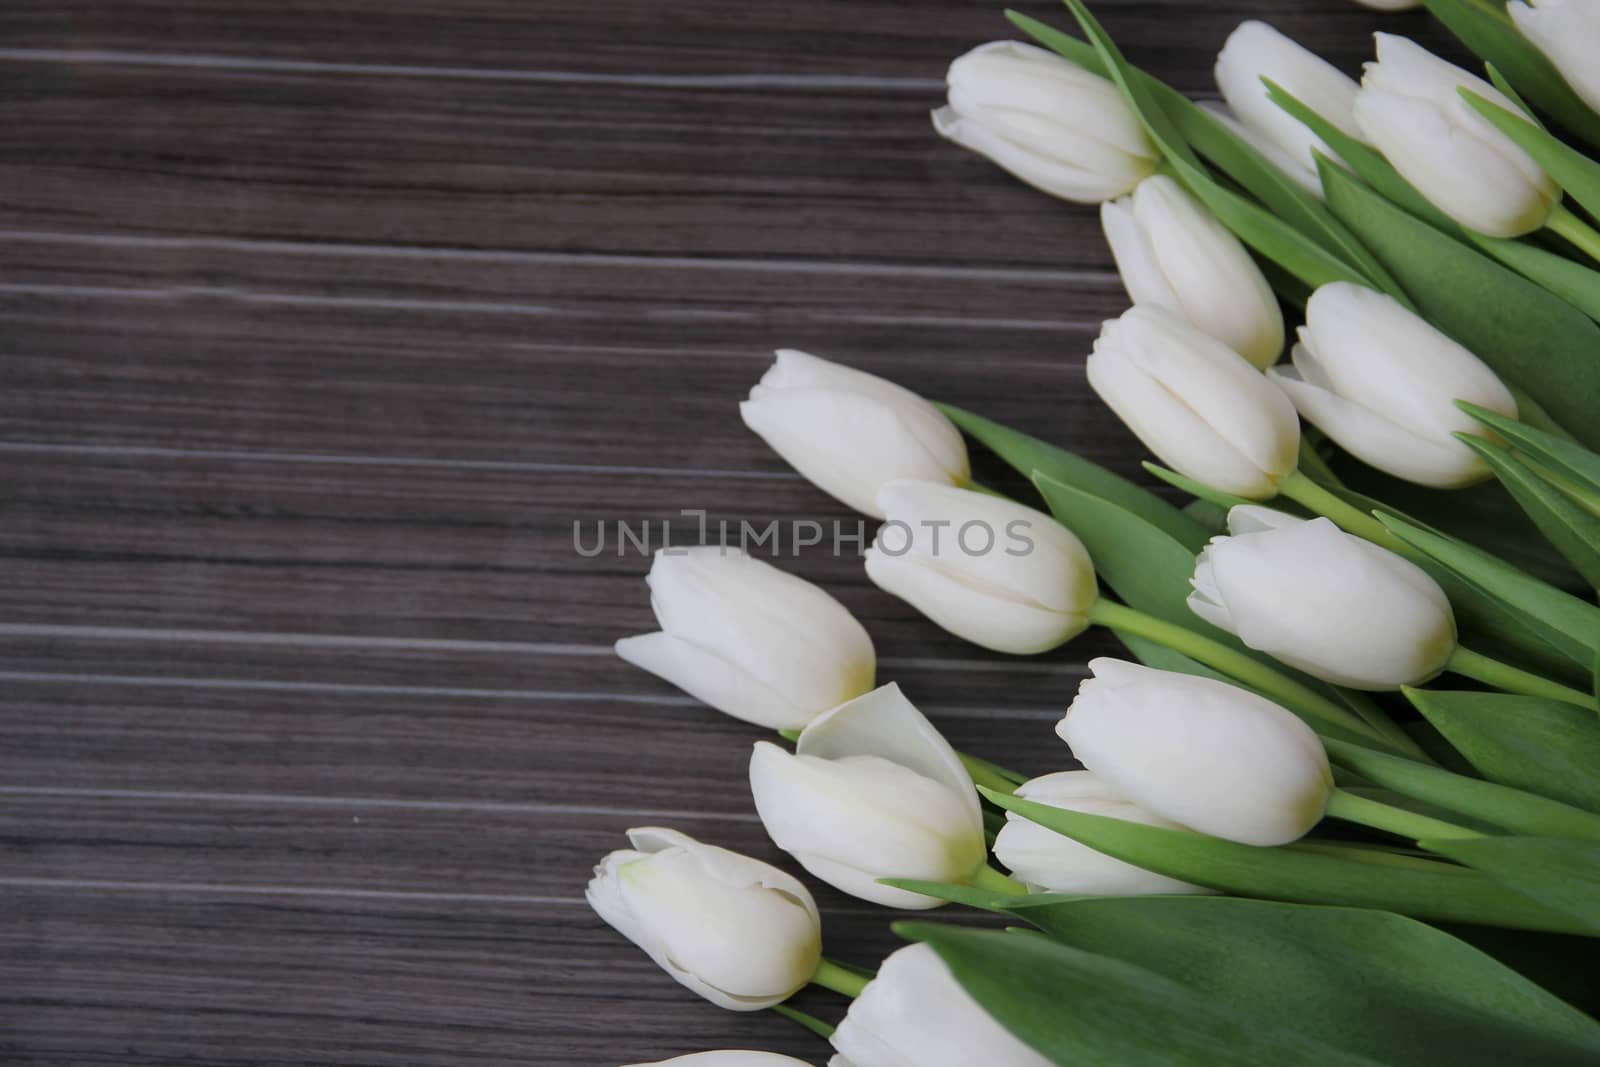 A large bouquet of white tulips with green leaves